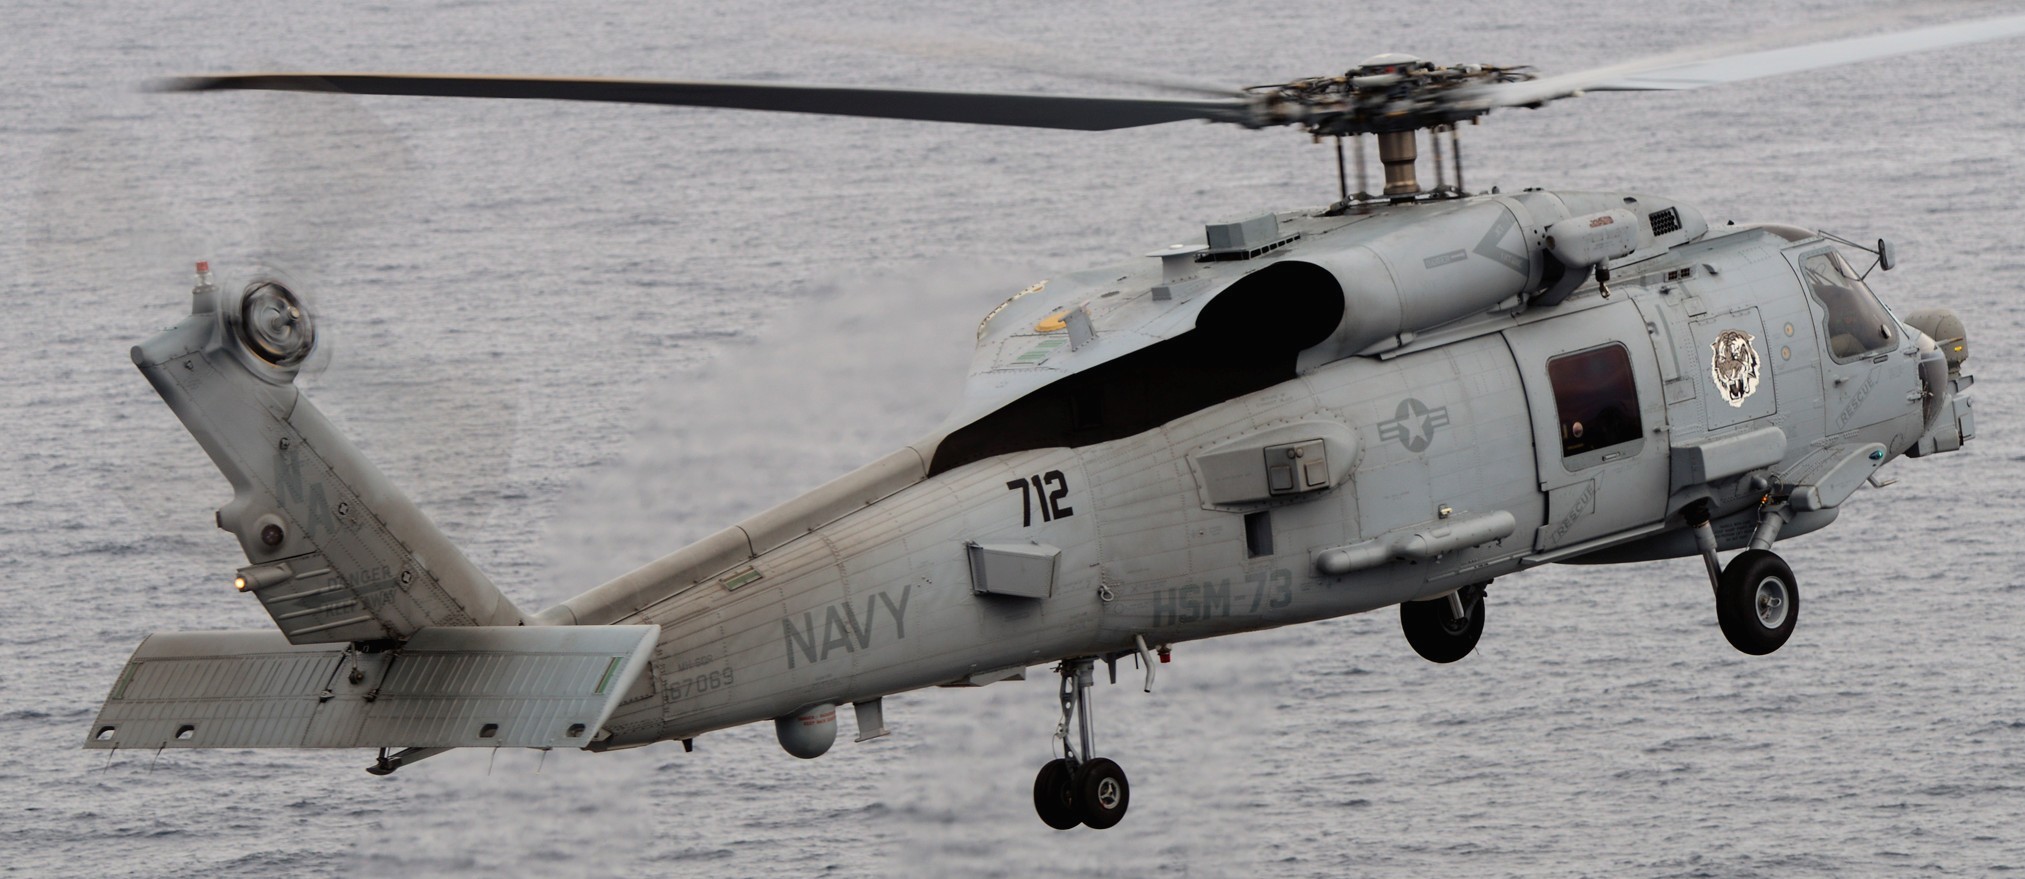 hsm-73 battlecats helicopter maritime strike squadron us navy mh-60r seahawk 2014 21